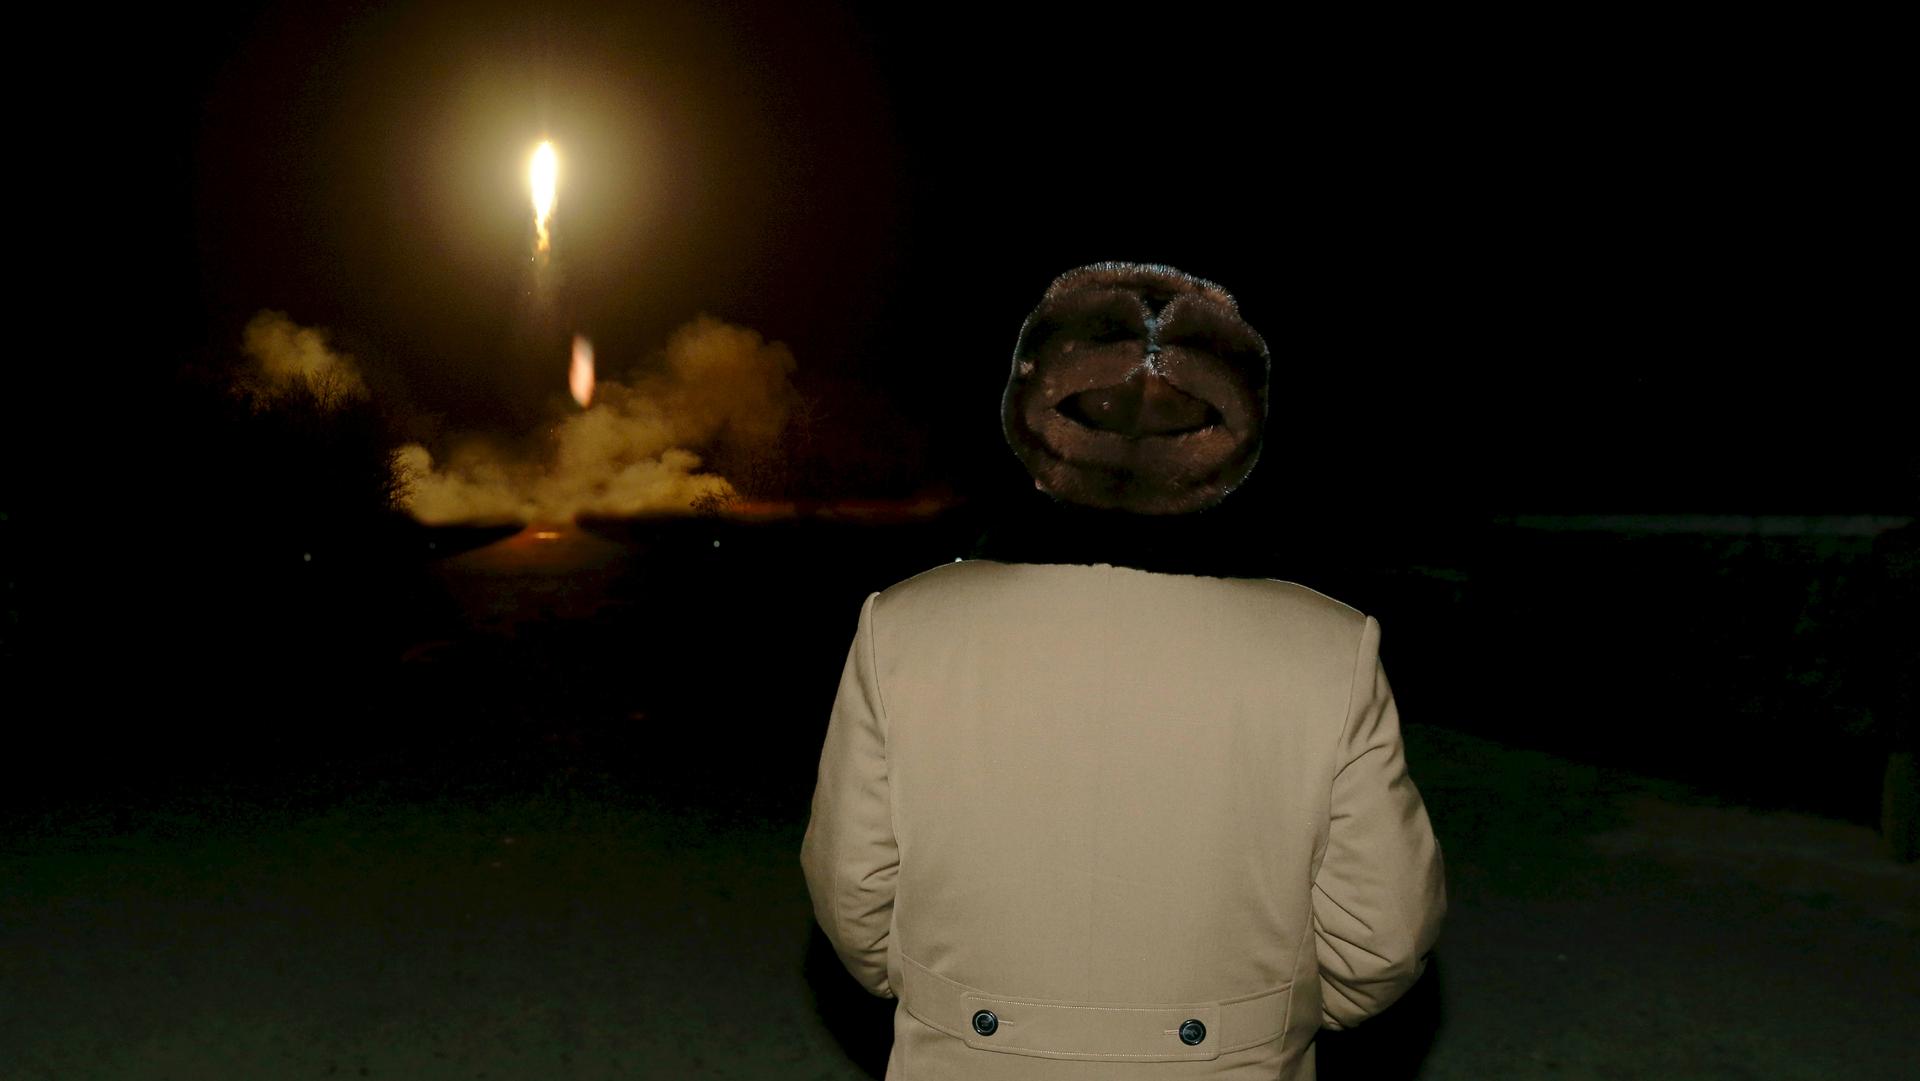 North Korean leader Kim Jong-un watches the ballistic missile test at an unknown location, in this undated file photo released by North Korea's Korean Central News Agency in Pyongyang on March 11, 2016. 